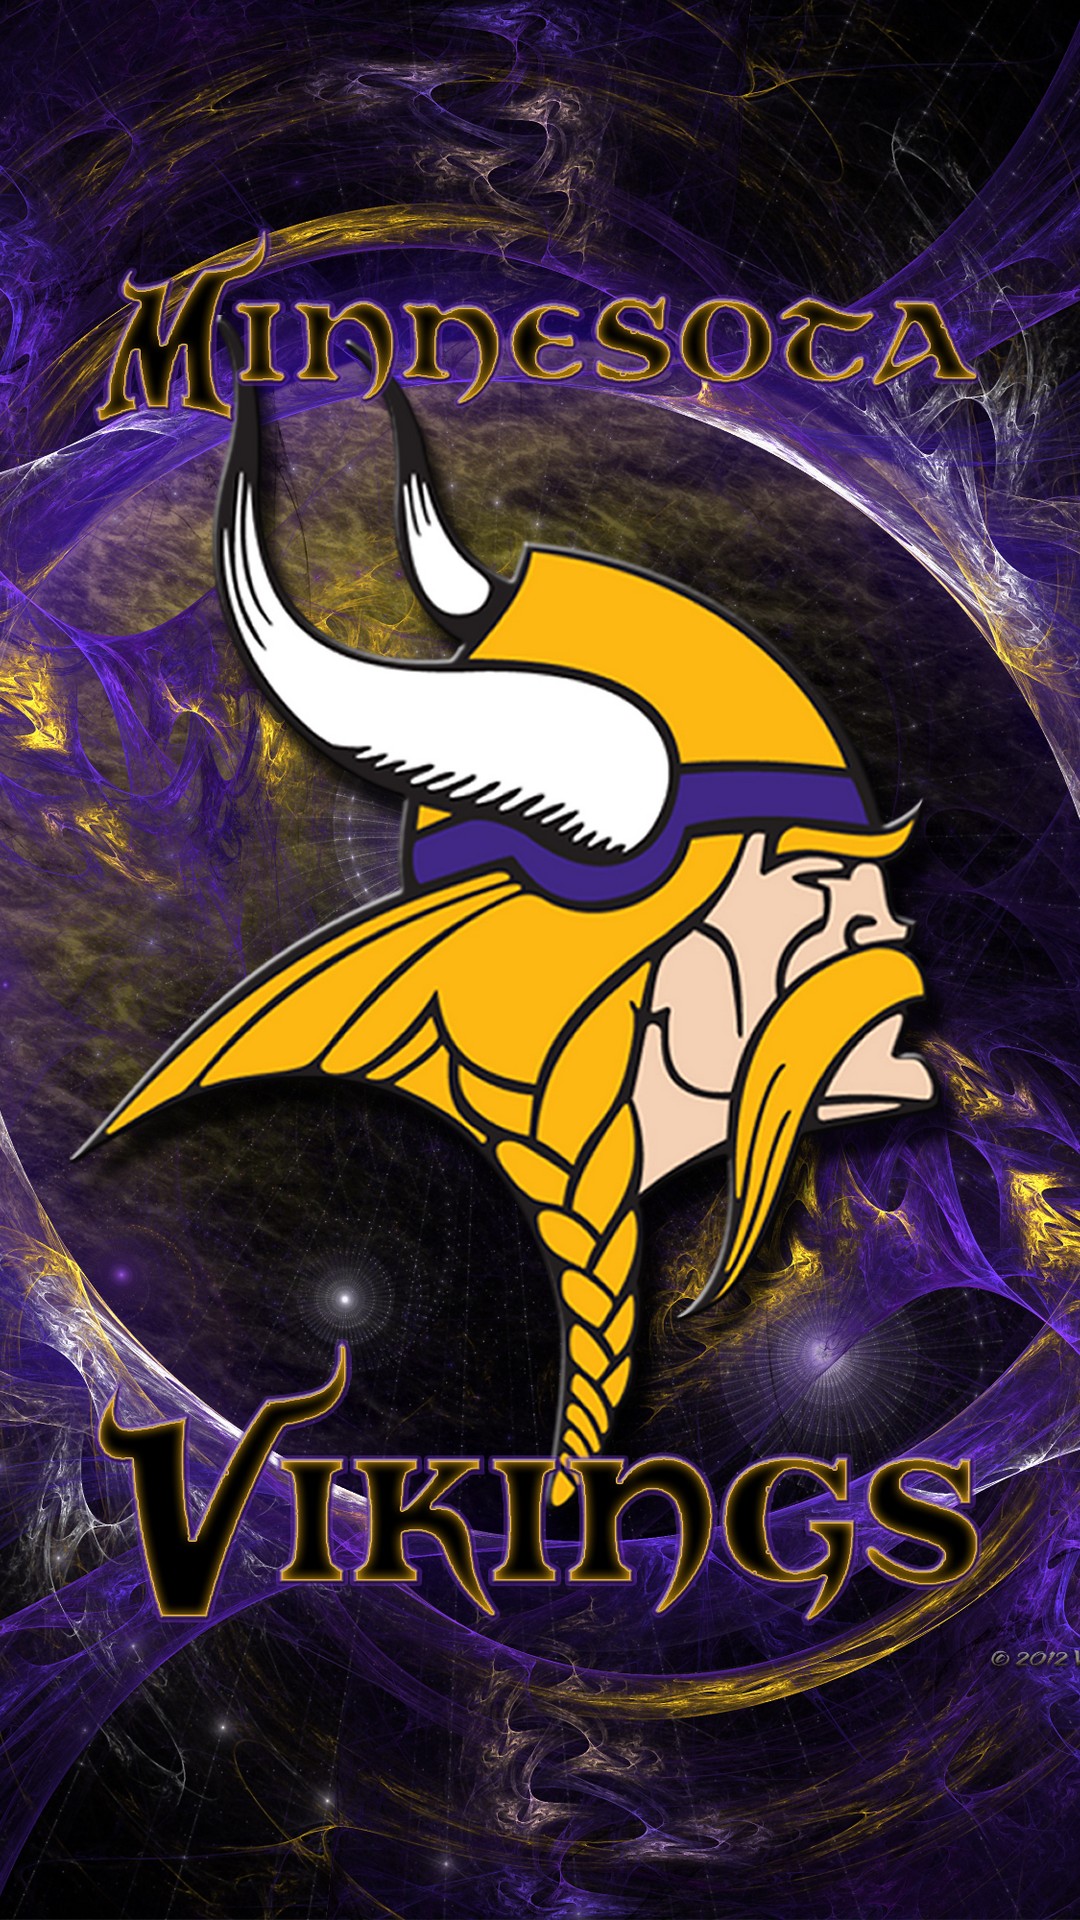 Minnesota Vikings iPhone Wallpaper High Quality With high-resolution 1080X1920 pixel. Donwload and set as wallpaper for your iPhone X, iPhone XS home screen backgrounds, XS Max, XR, iPhone8 lock screen wallpaper, iPhone 7, 6, SE, and other mobile devices